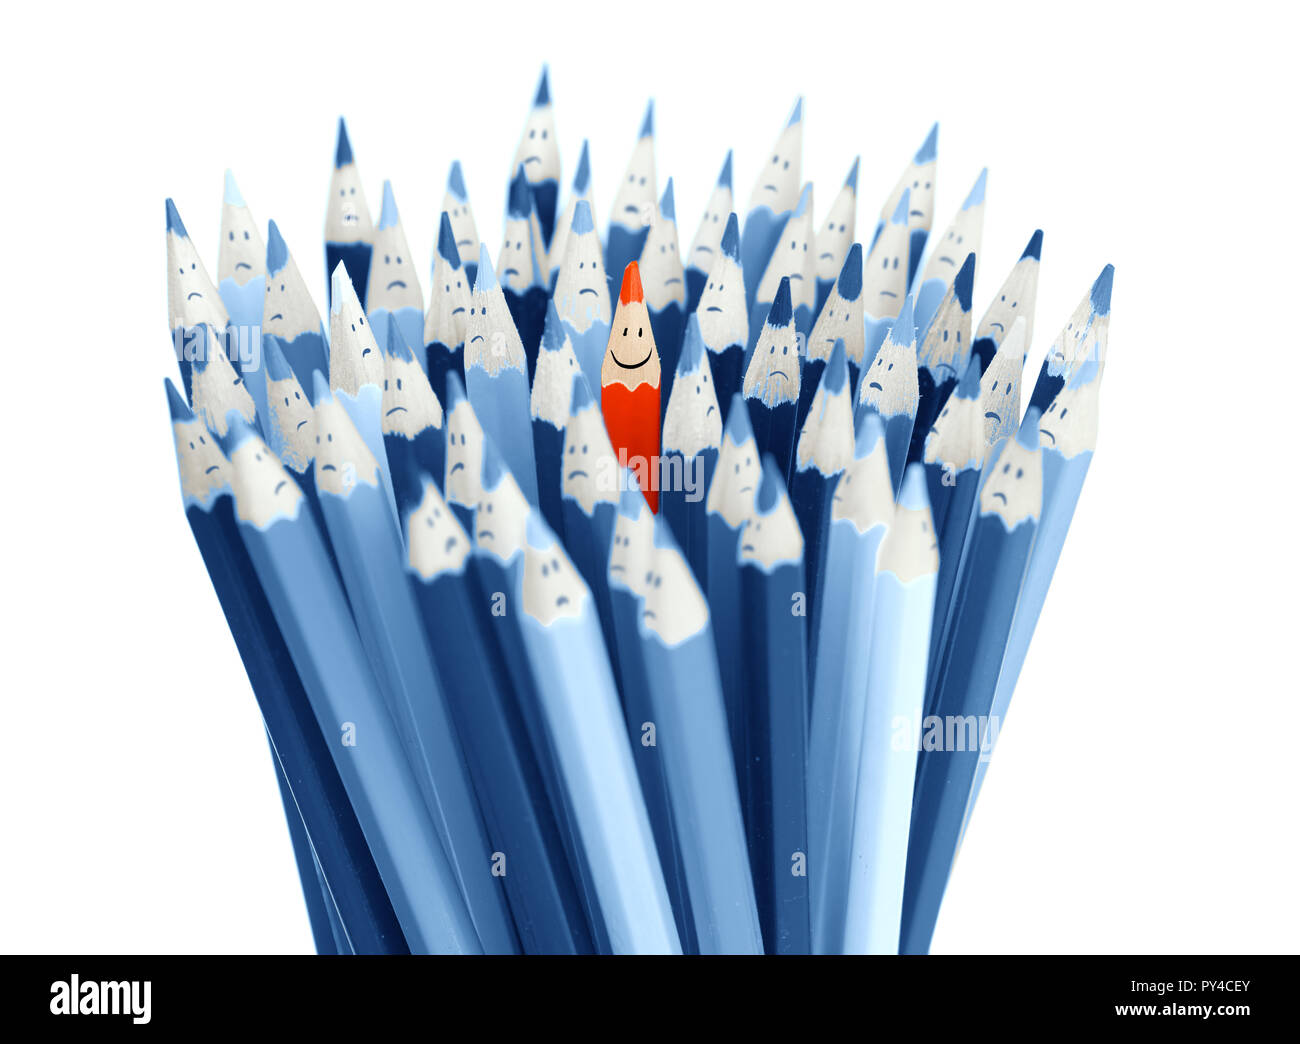 People pencils communicating concept Stock Photo